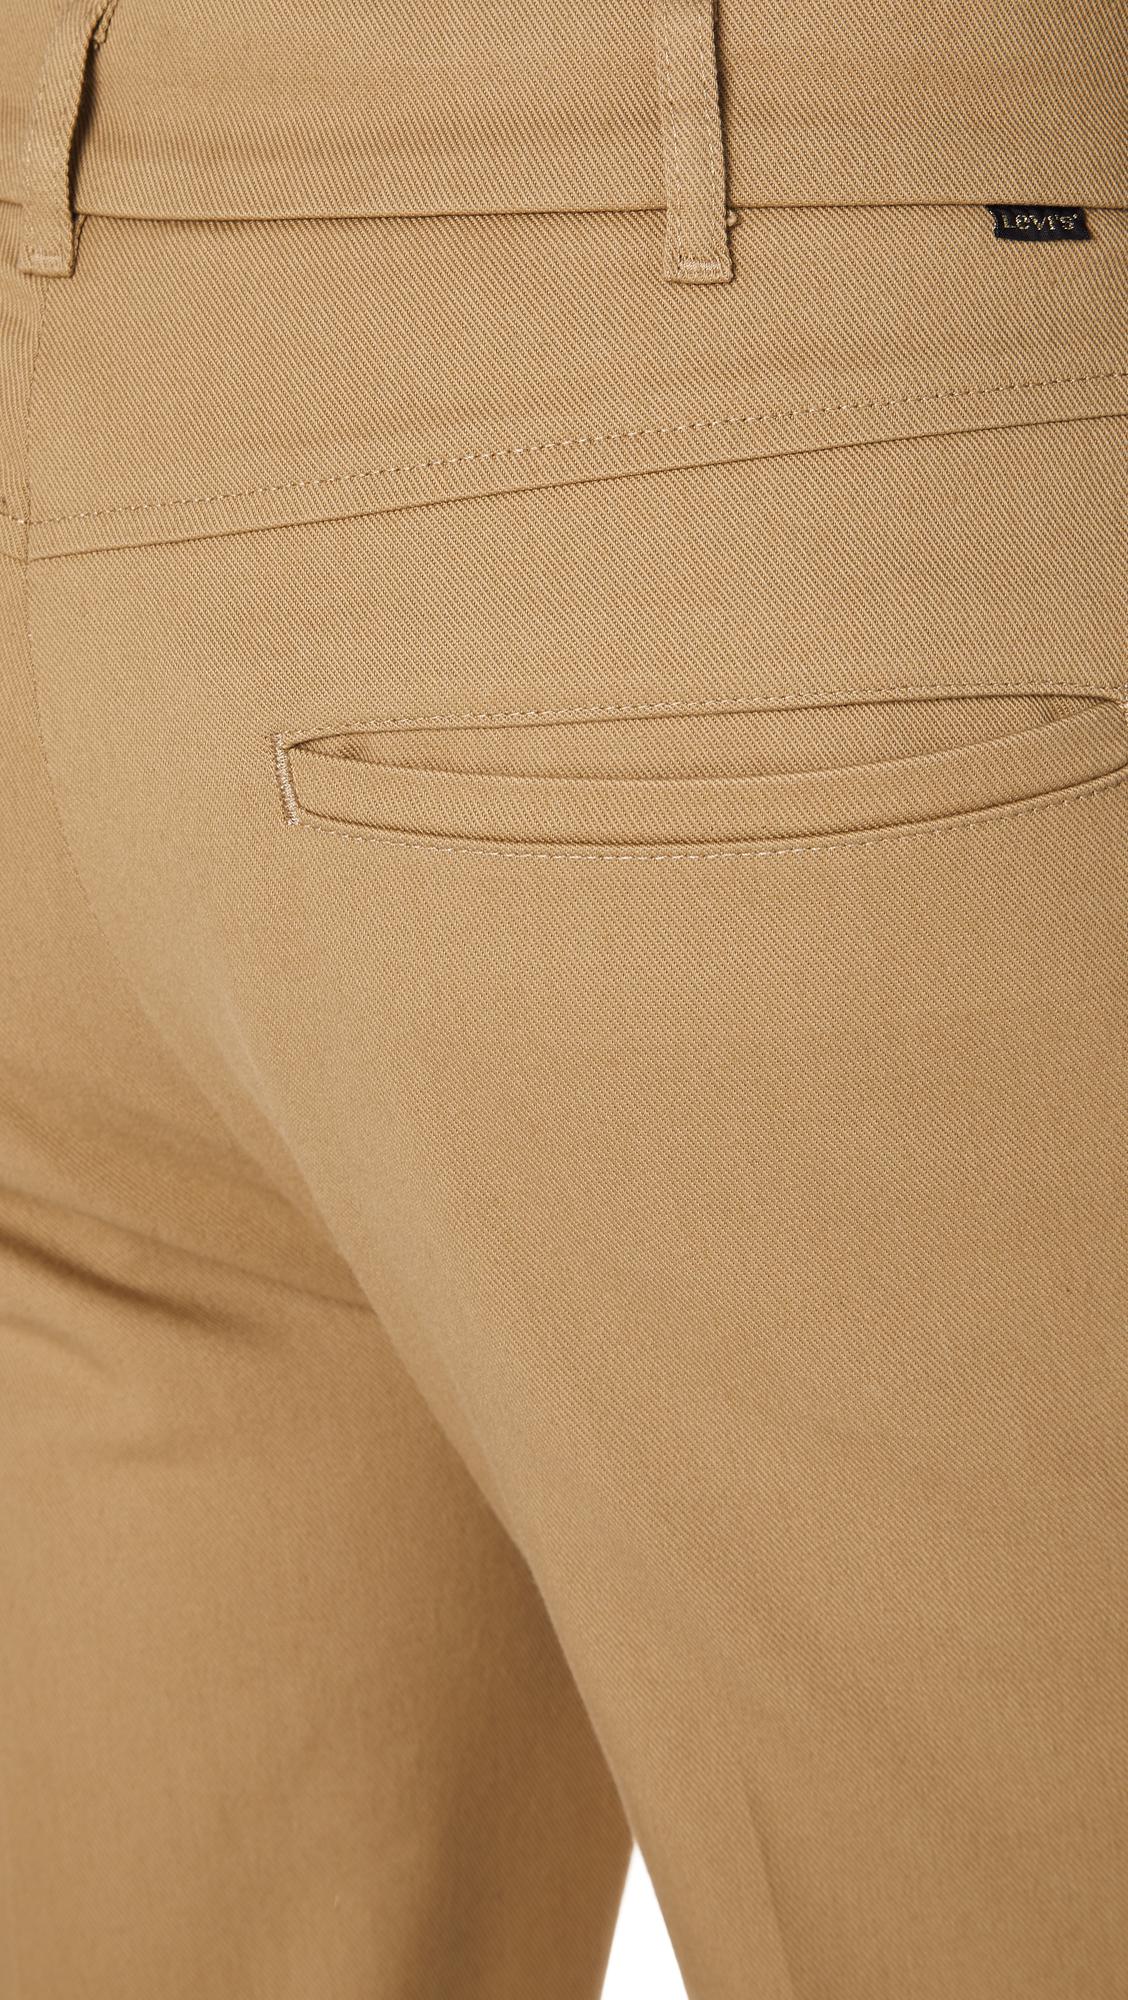 Levi's Cotton Sta Prest 502 Tapered Trousers in Khaki (Natural) for Men ...